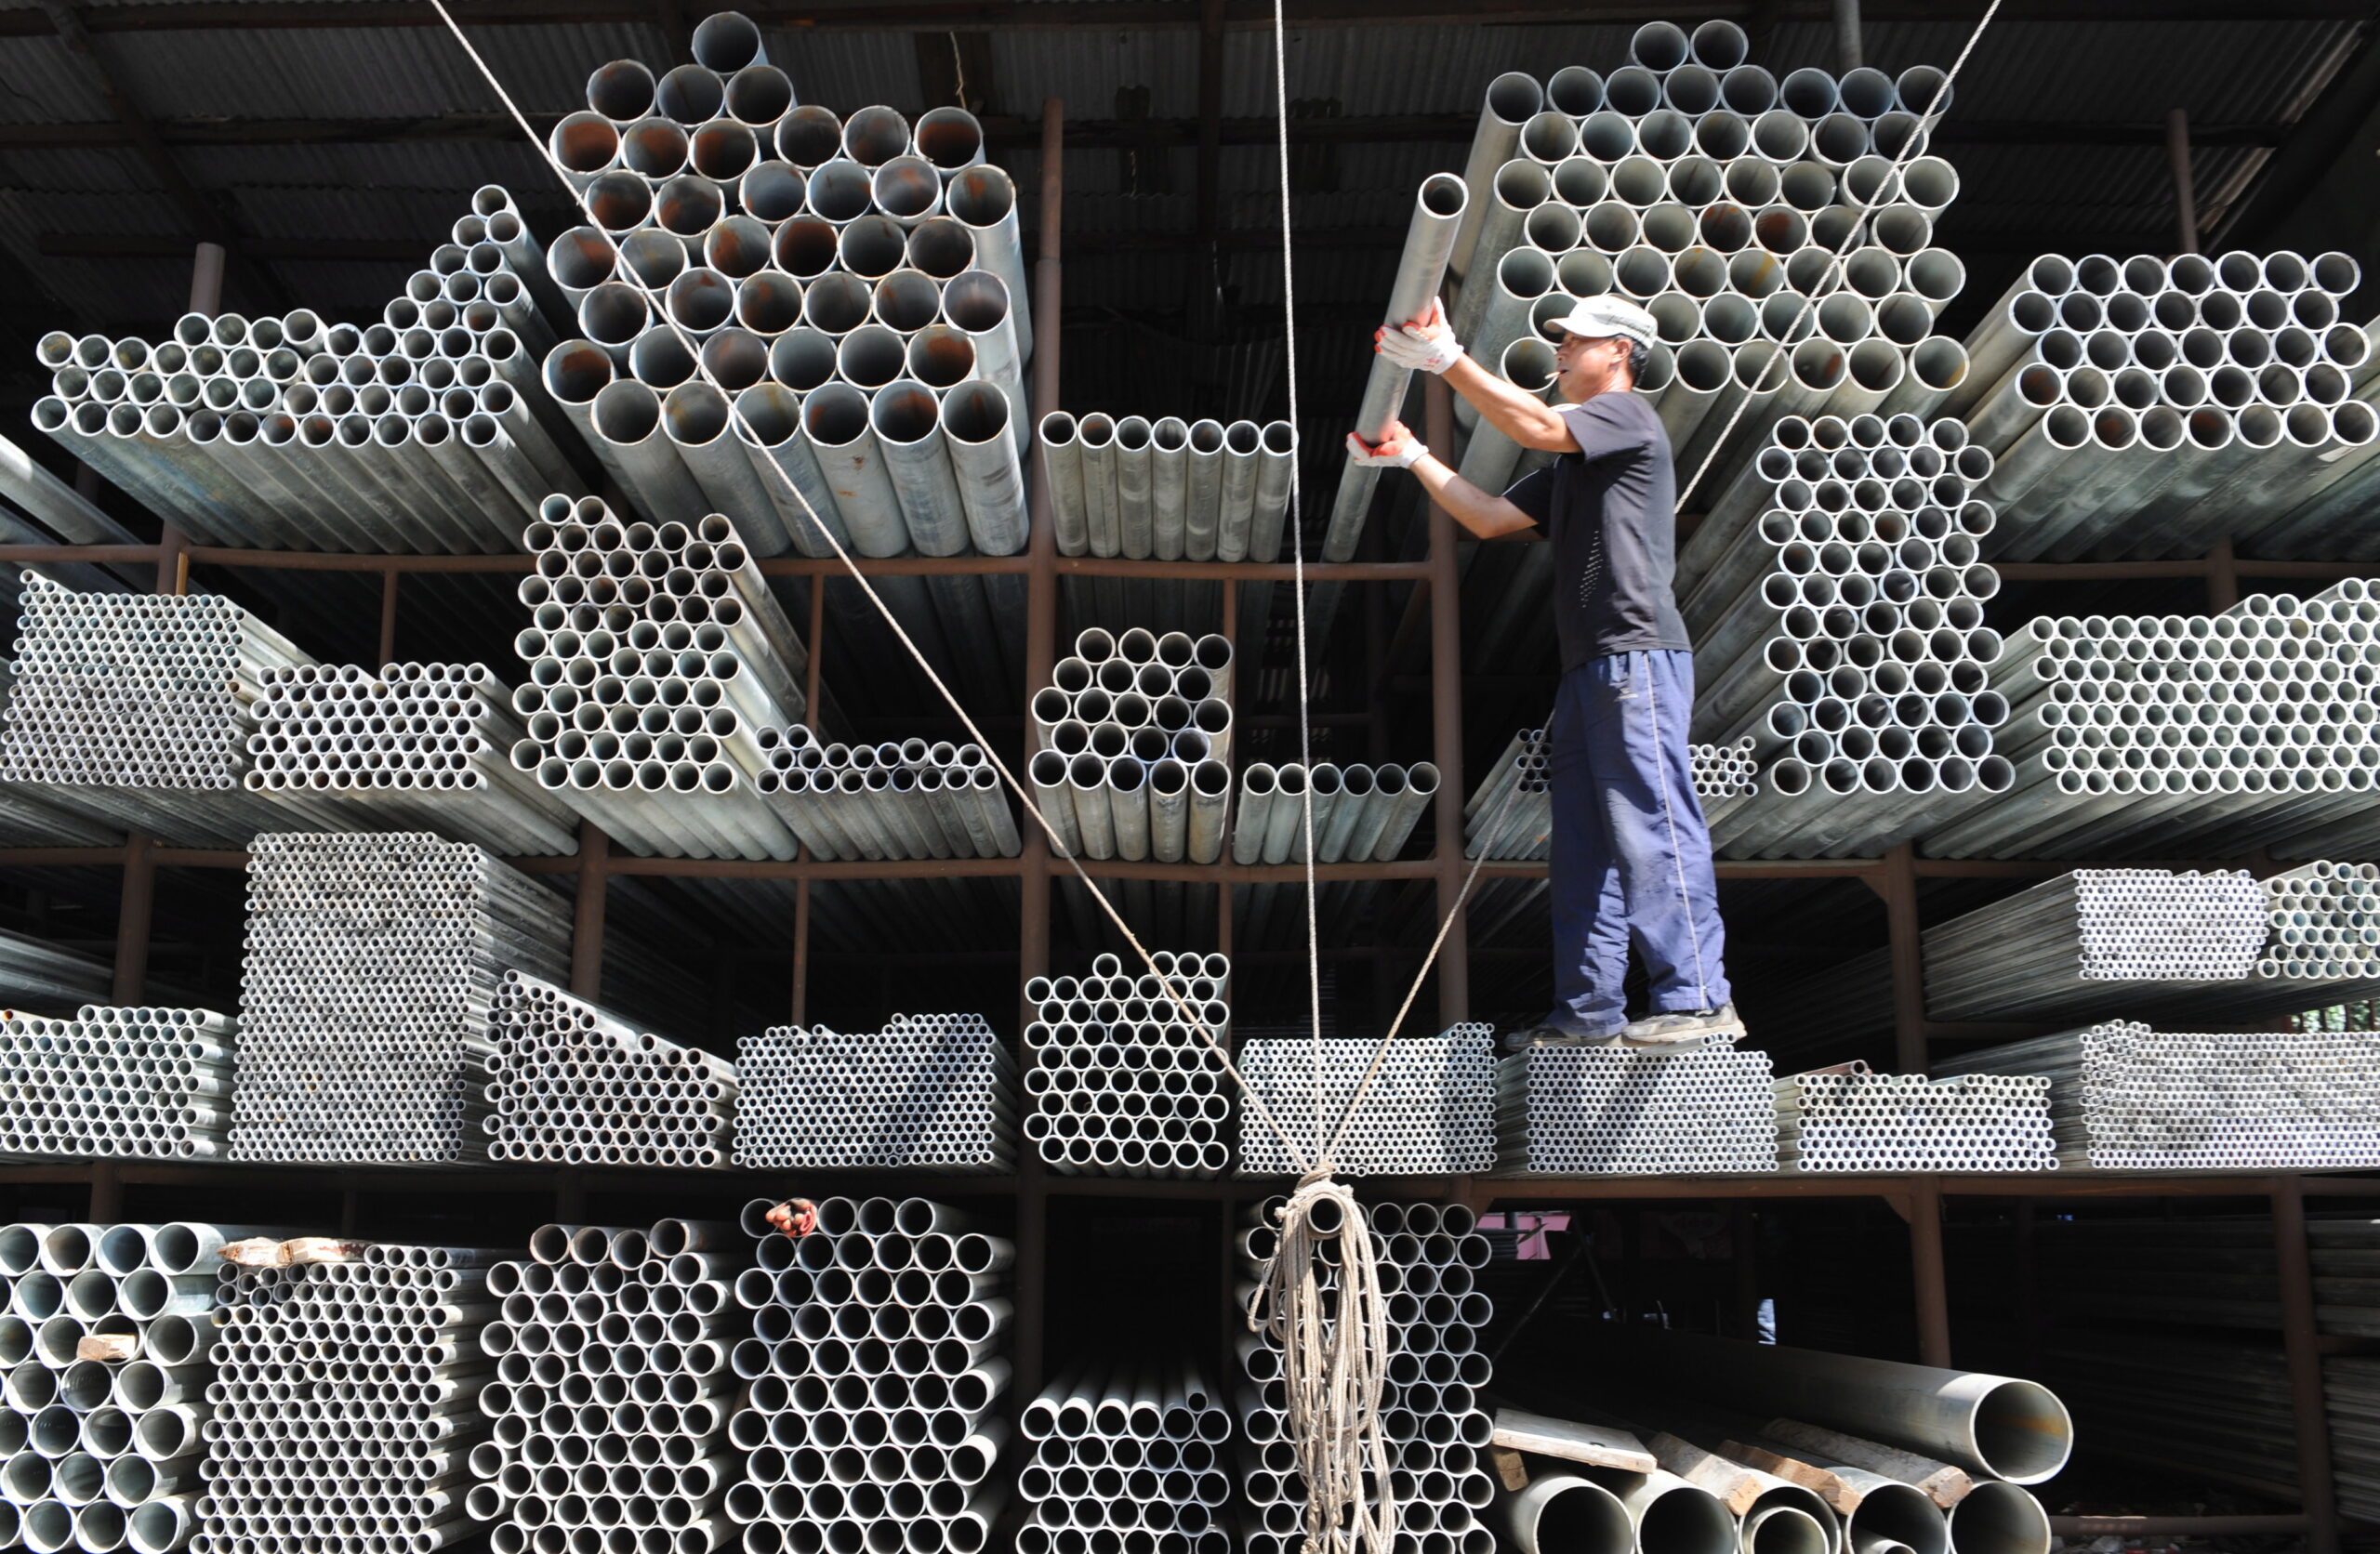 Steelmakers tell EU to get tough on China dumping